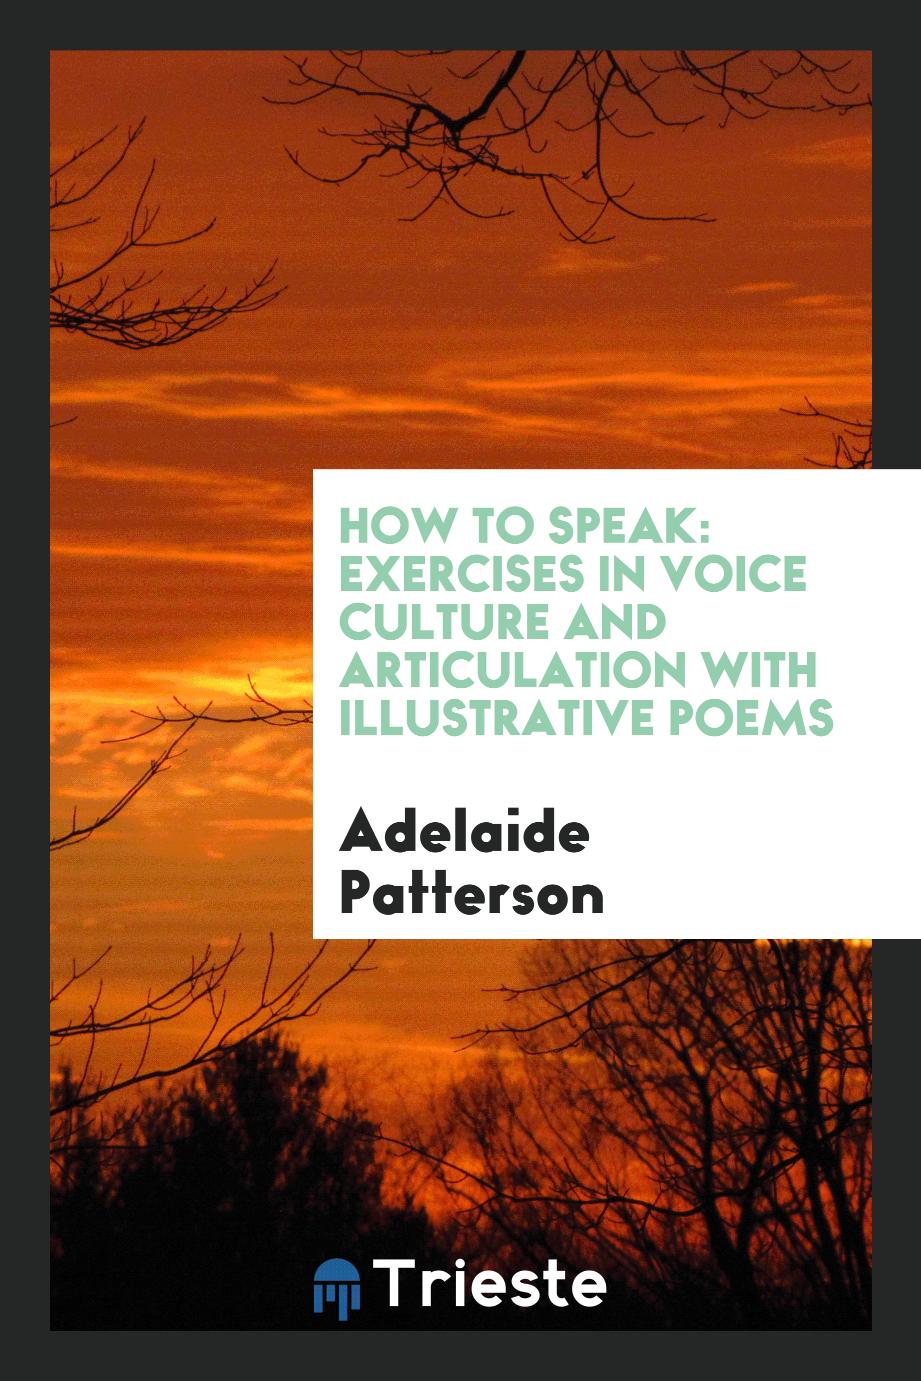 How to Speak: Exercises in Voice Culture and Articulation with Illustrative Poems